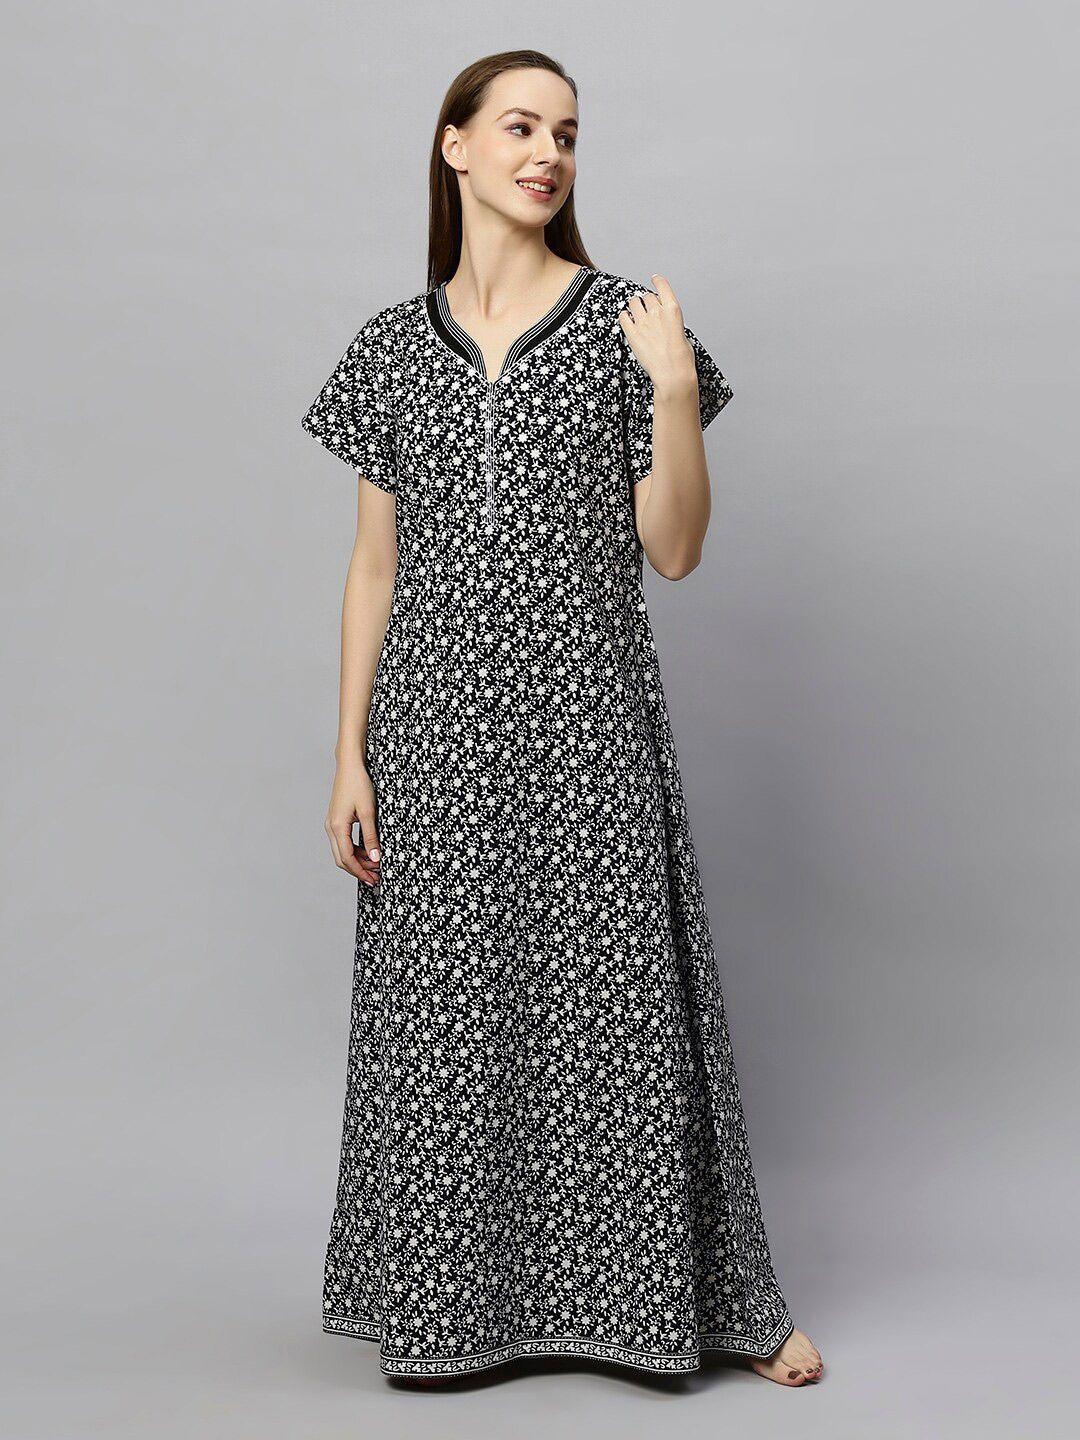 etc-black-floral-printed-pure-cotton-maxi-nightdress